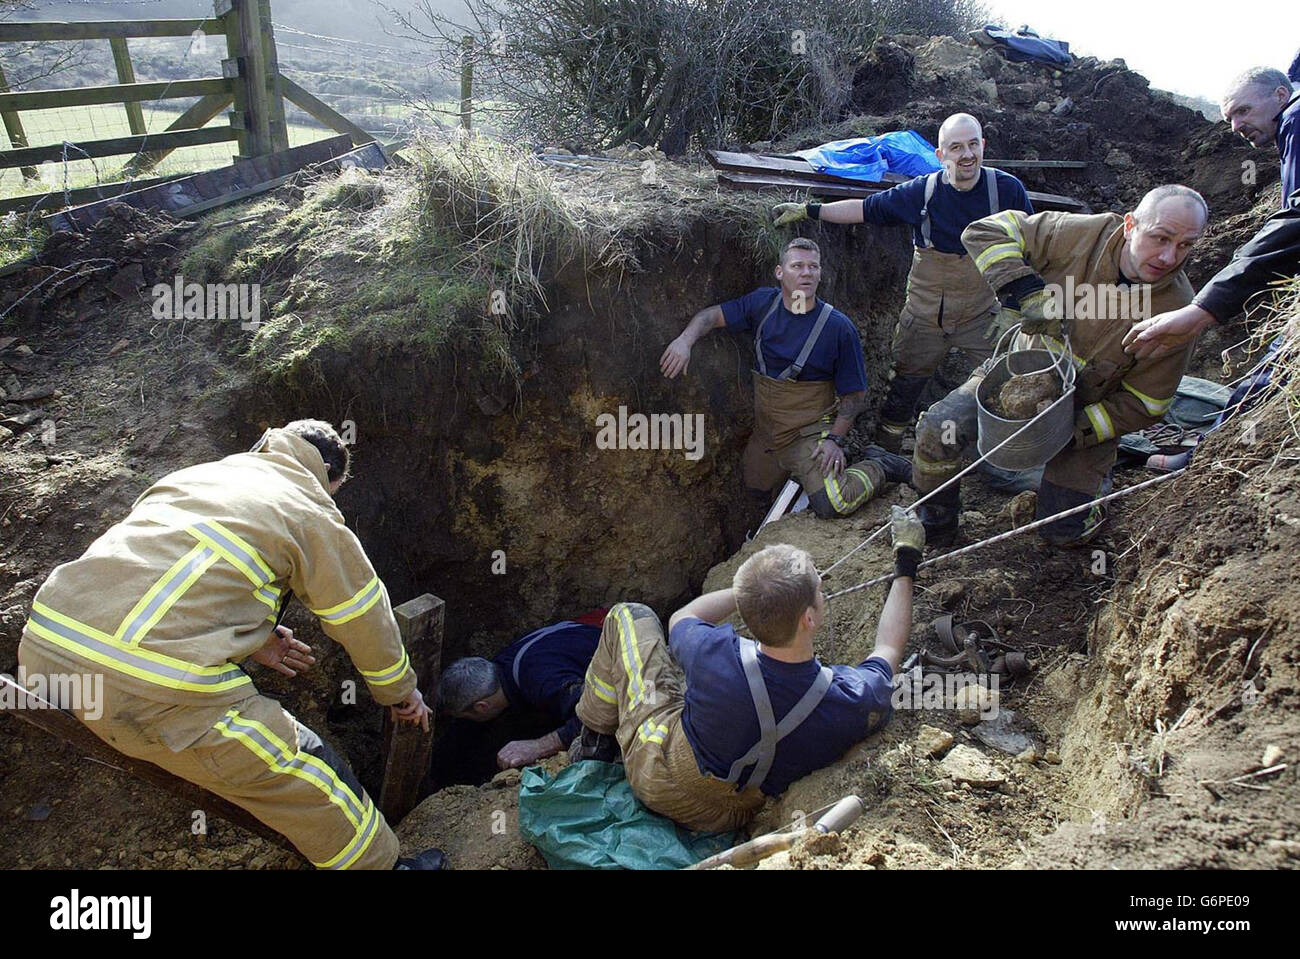 Firemen carefully remove rubble in a bid to rescue Sasha, a 12-week-old Staffordshire bull terrier puppy, after she plunged down a 40ft hole in Old Cassop, near Spennymoor, County Durham. Fire officers were forced to give up the two-day rescue effort after it became to dangerous to continue. Stock Photo